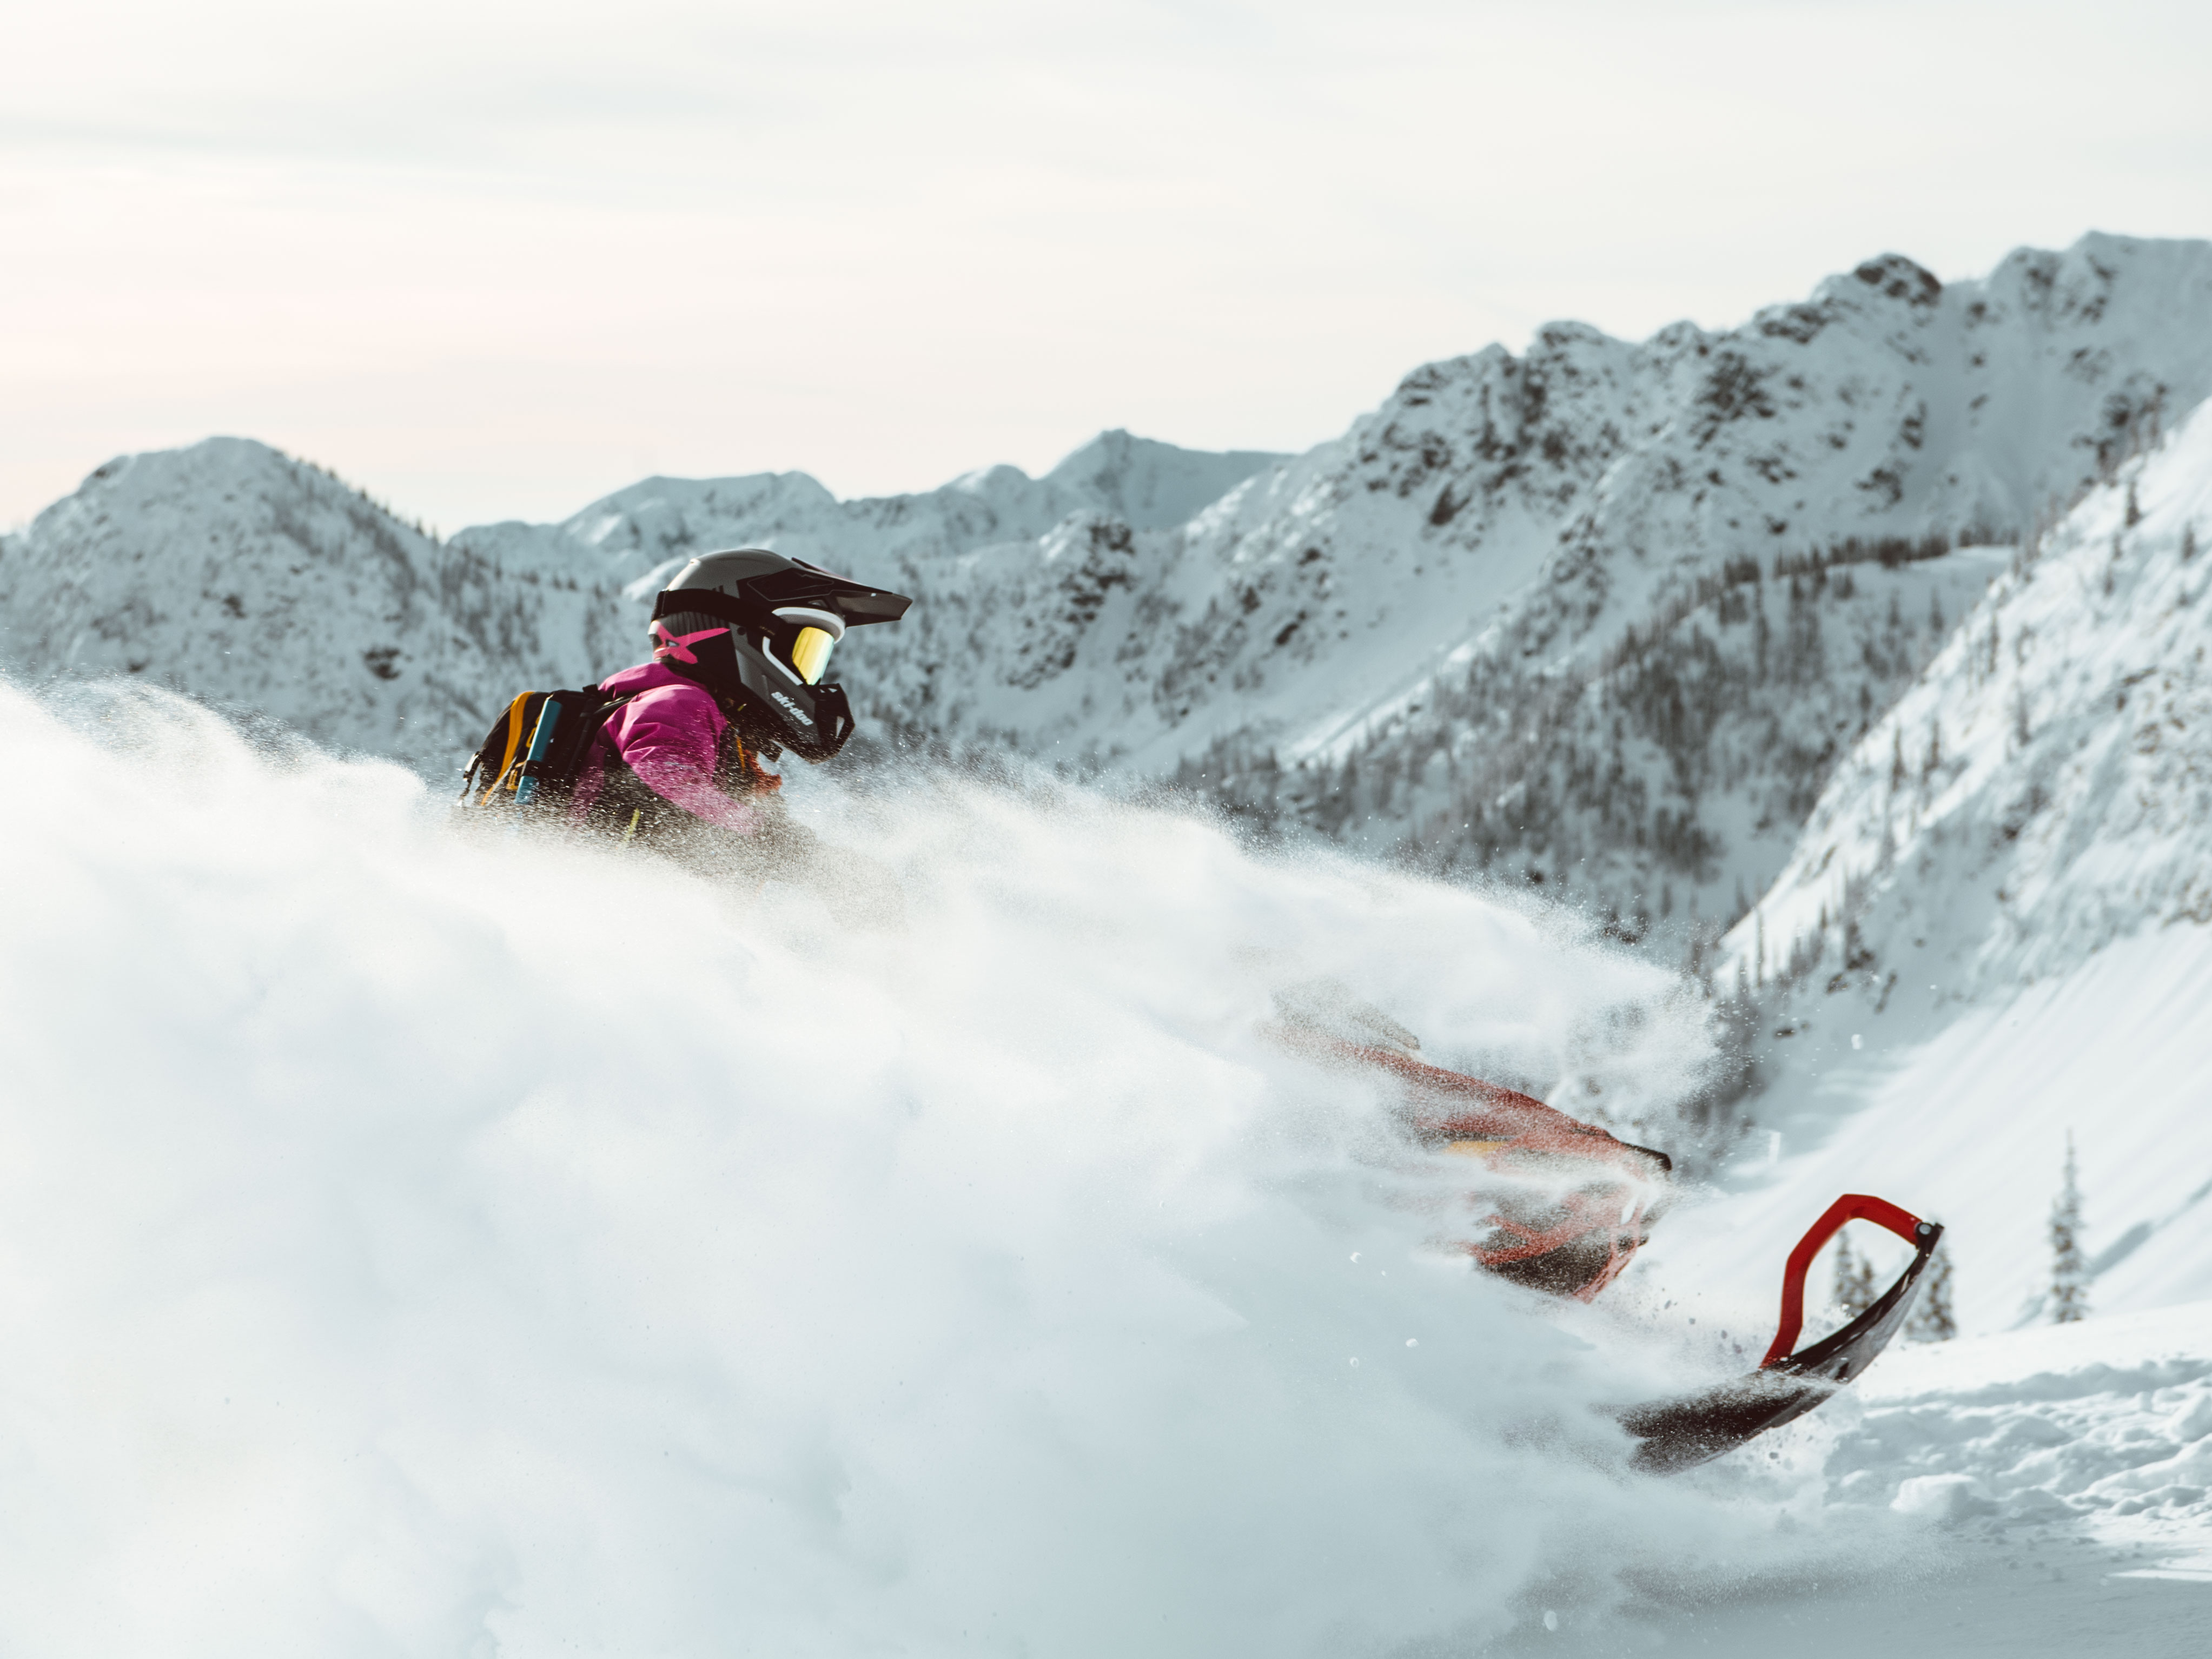 Ashley Chaffin jumping in Deep-Snow with her Ski-Doo Summit